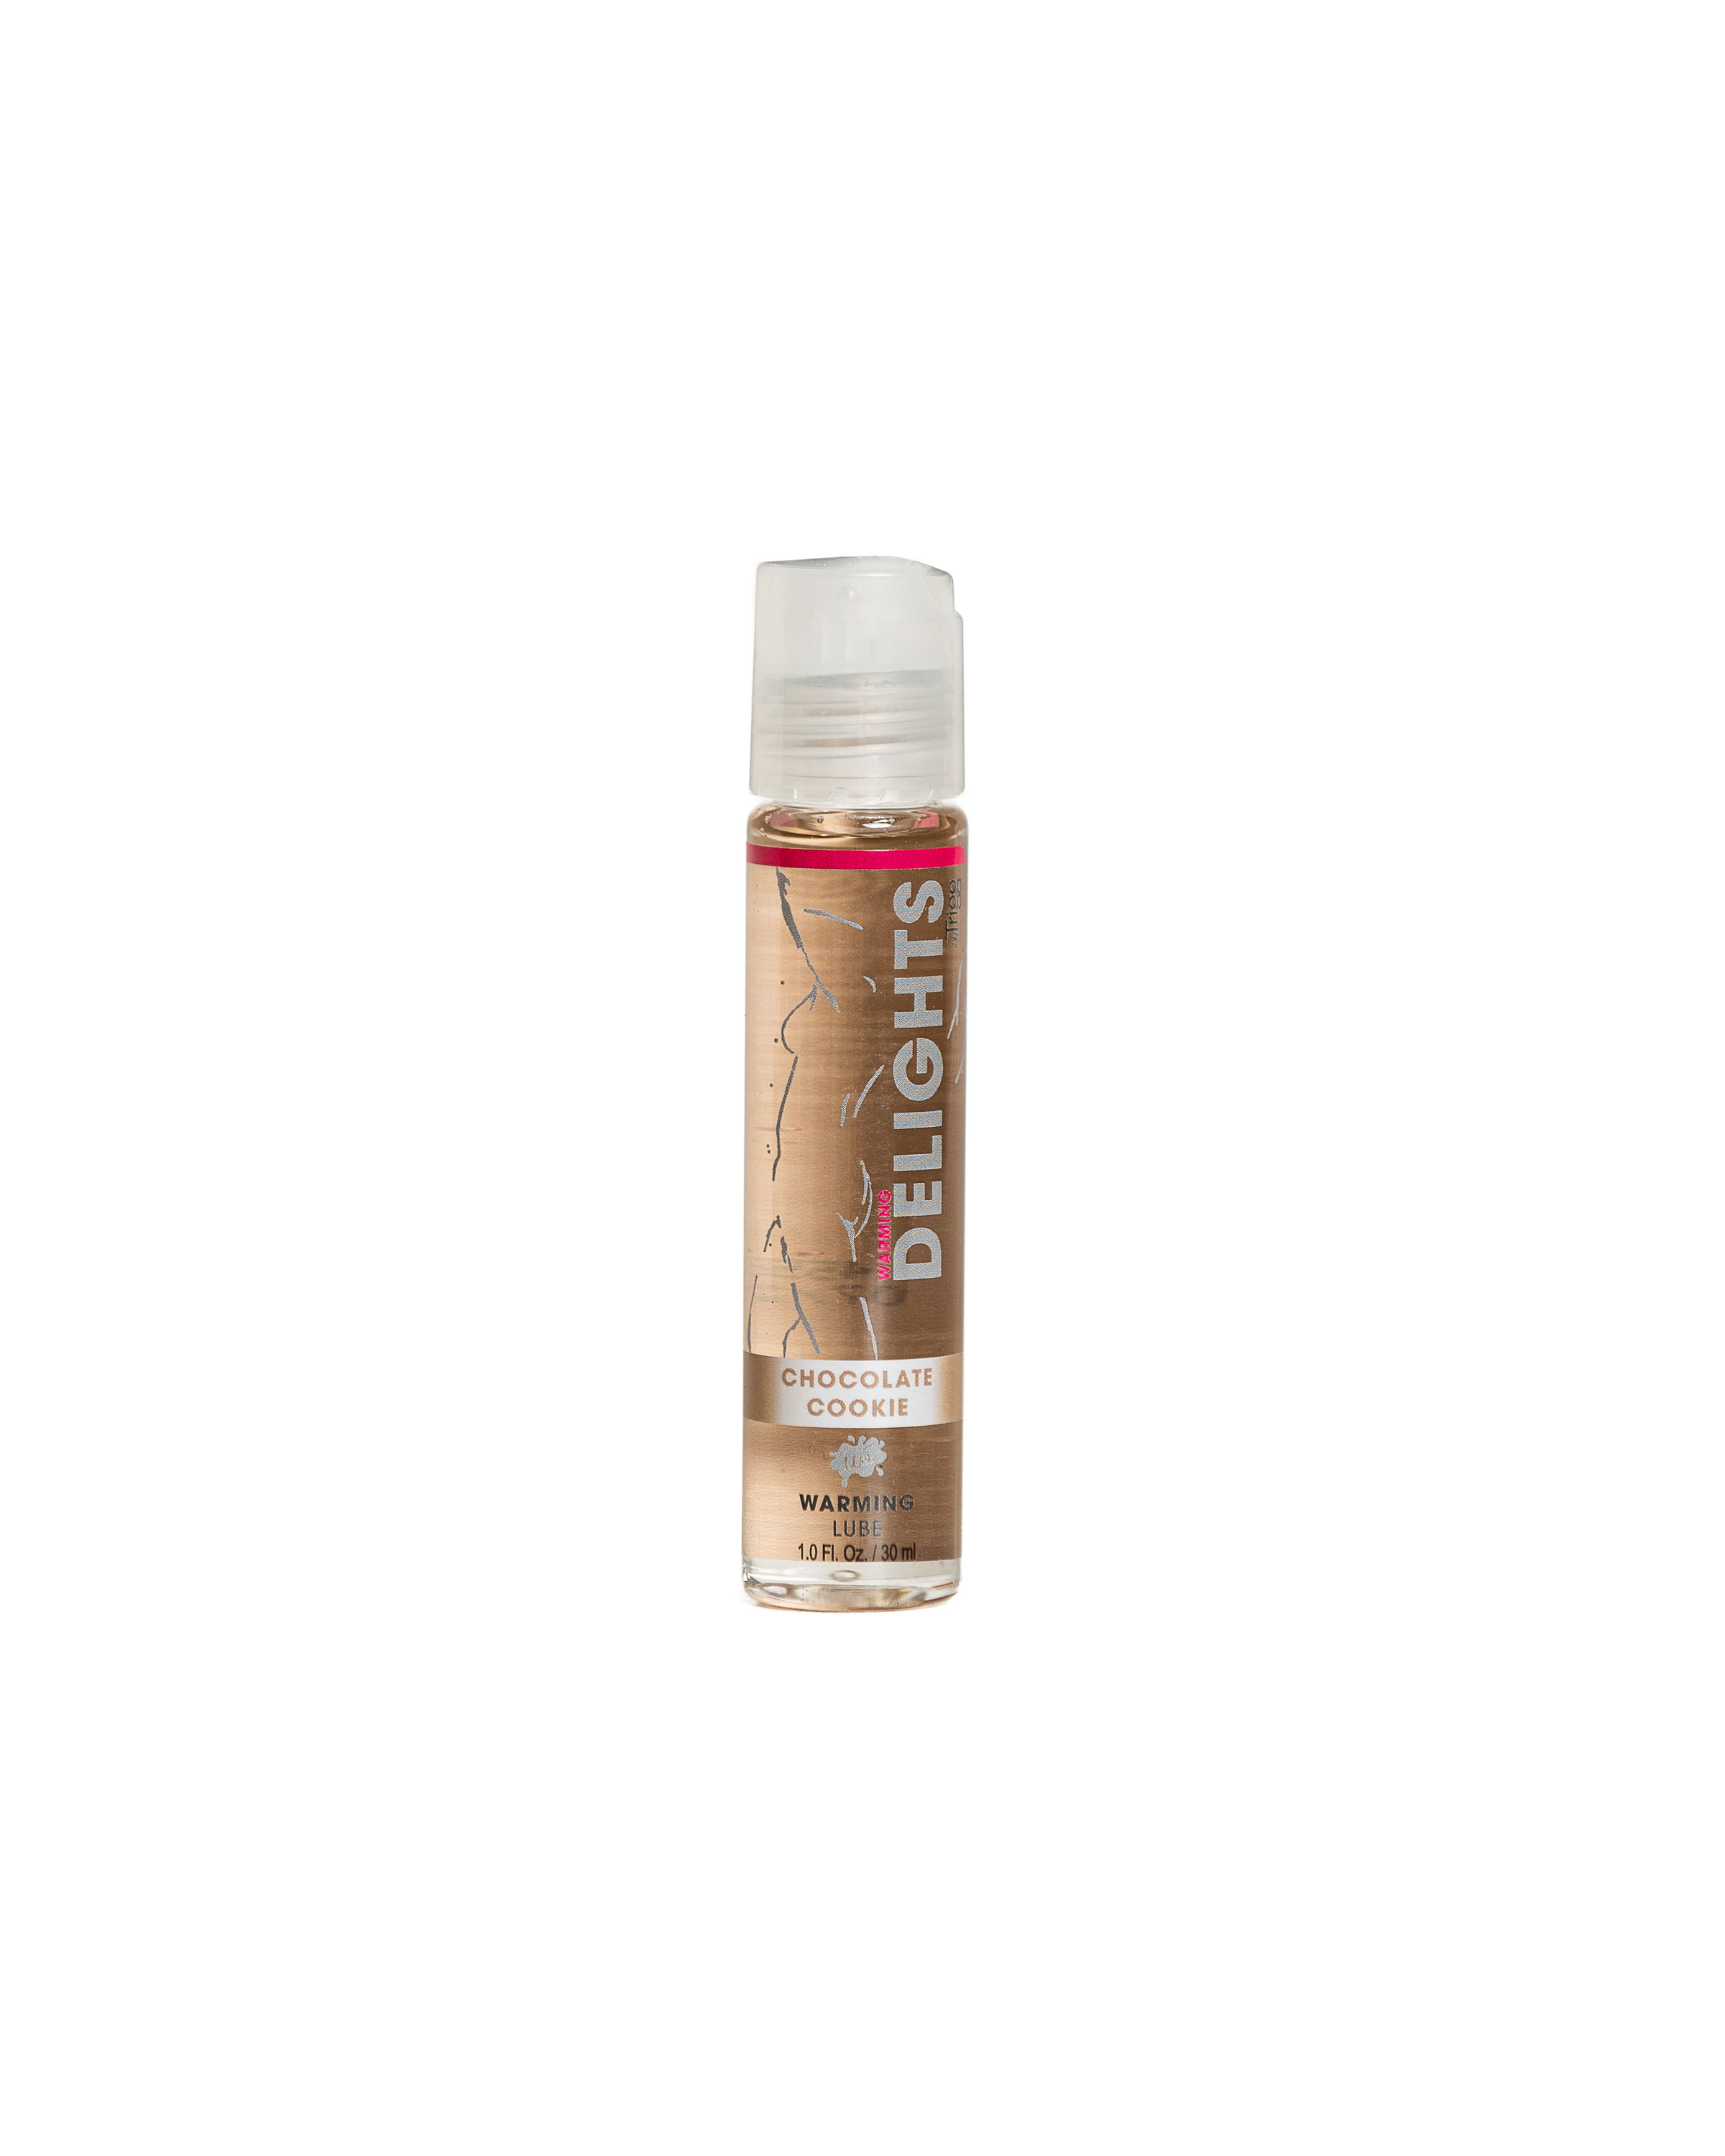 warming delight chocolate cookie flavored lube  oz 